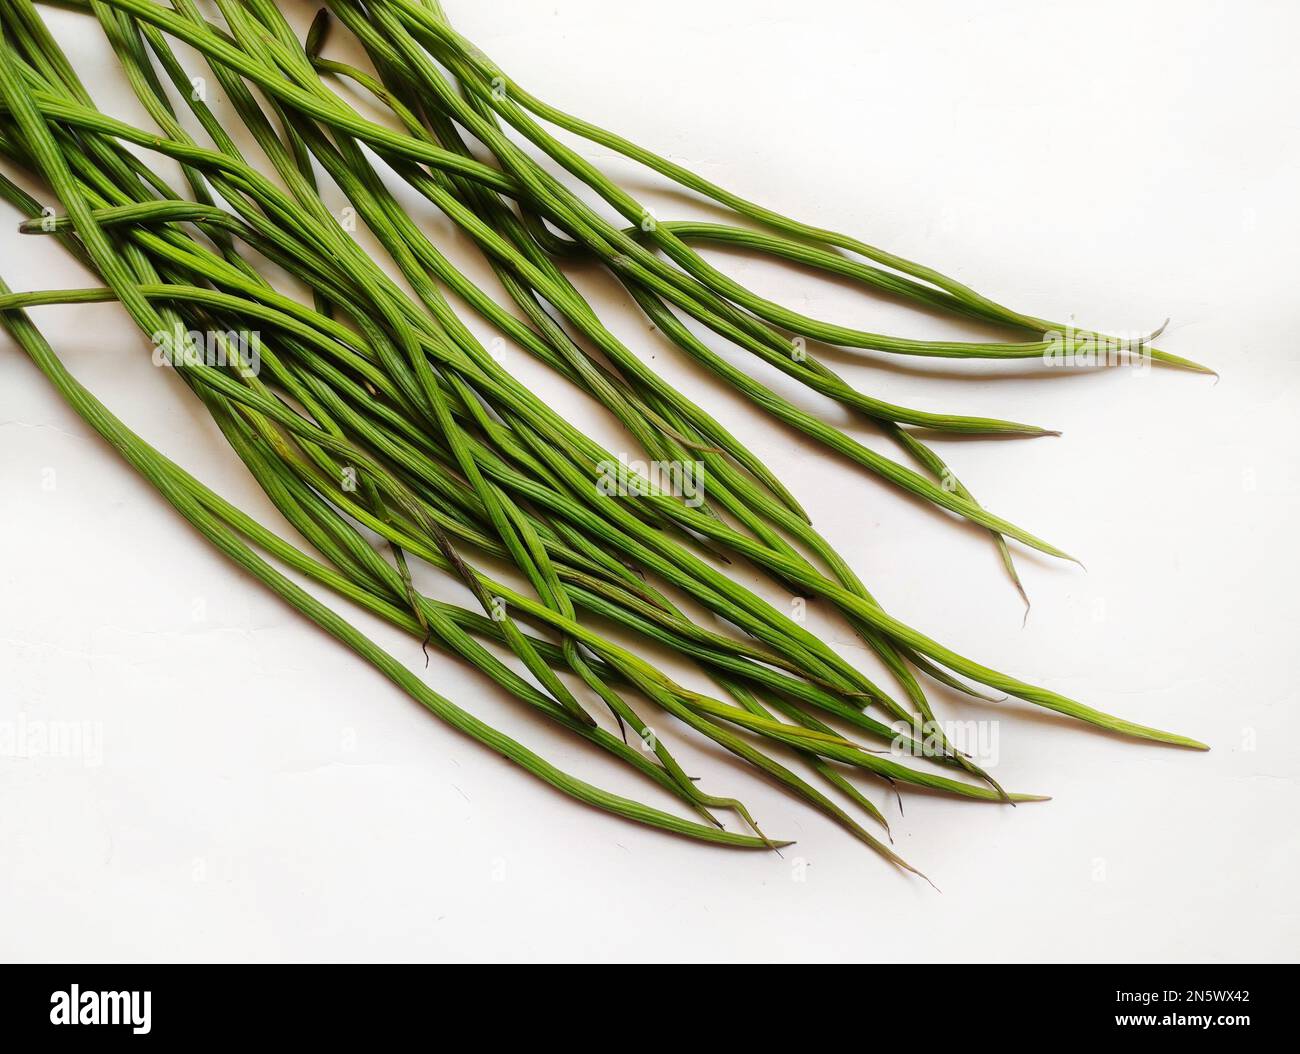 Drumsticks are pods from the Moringa tree used as a vegetable. Stock Photo